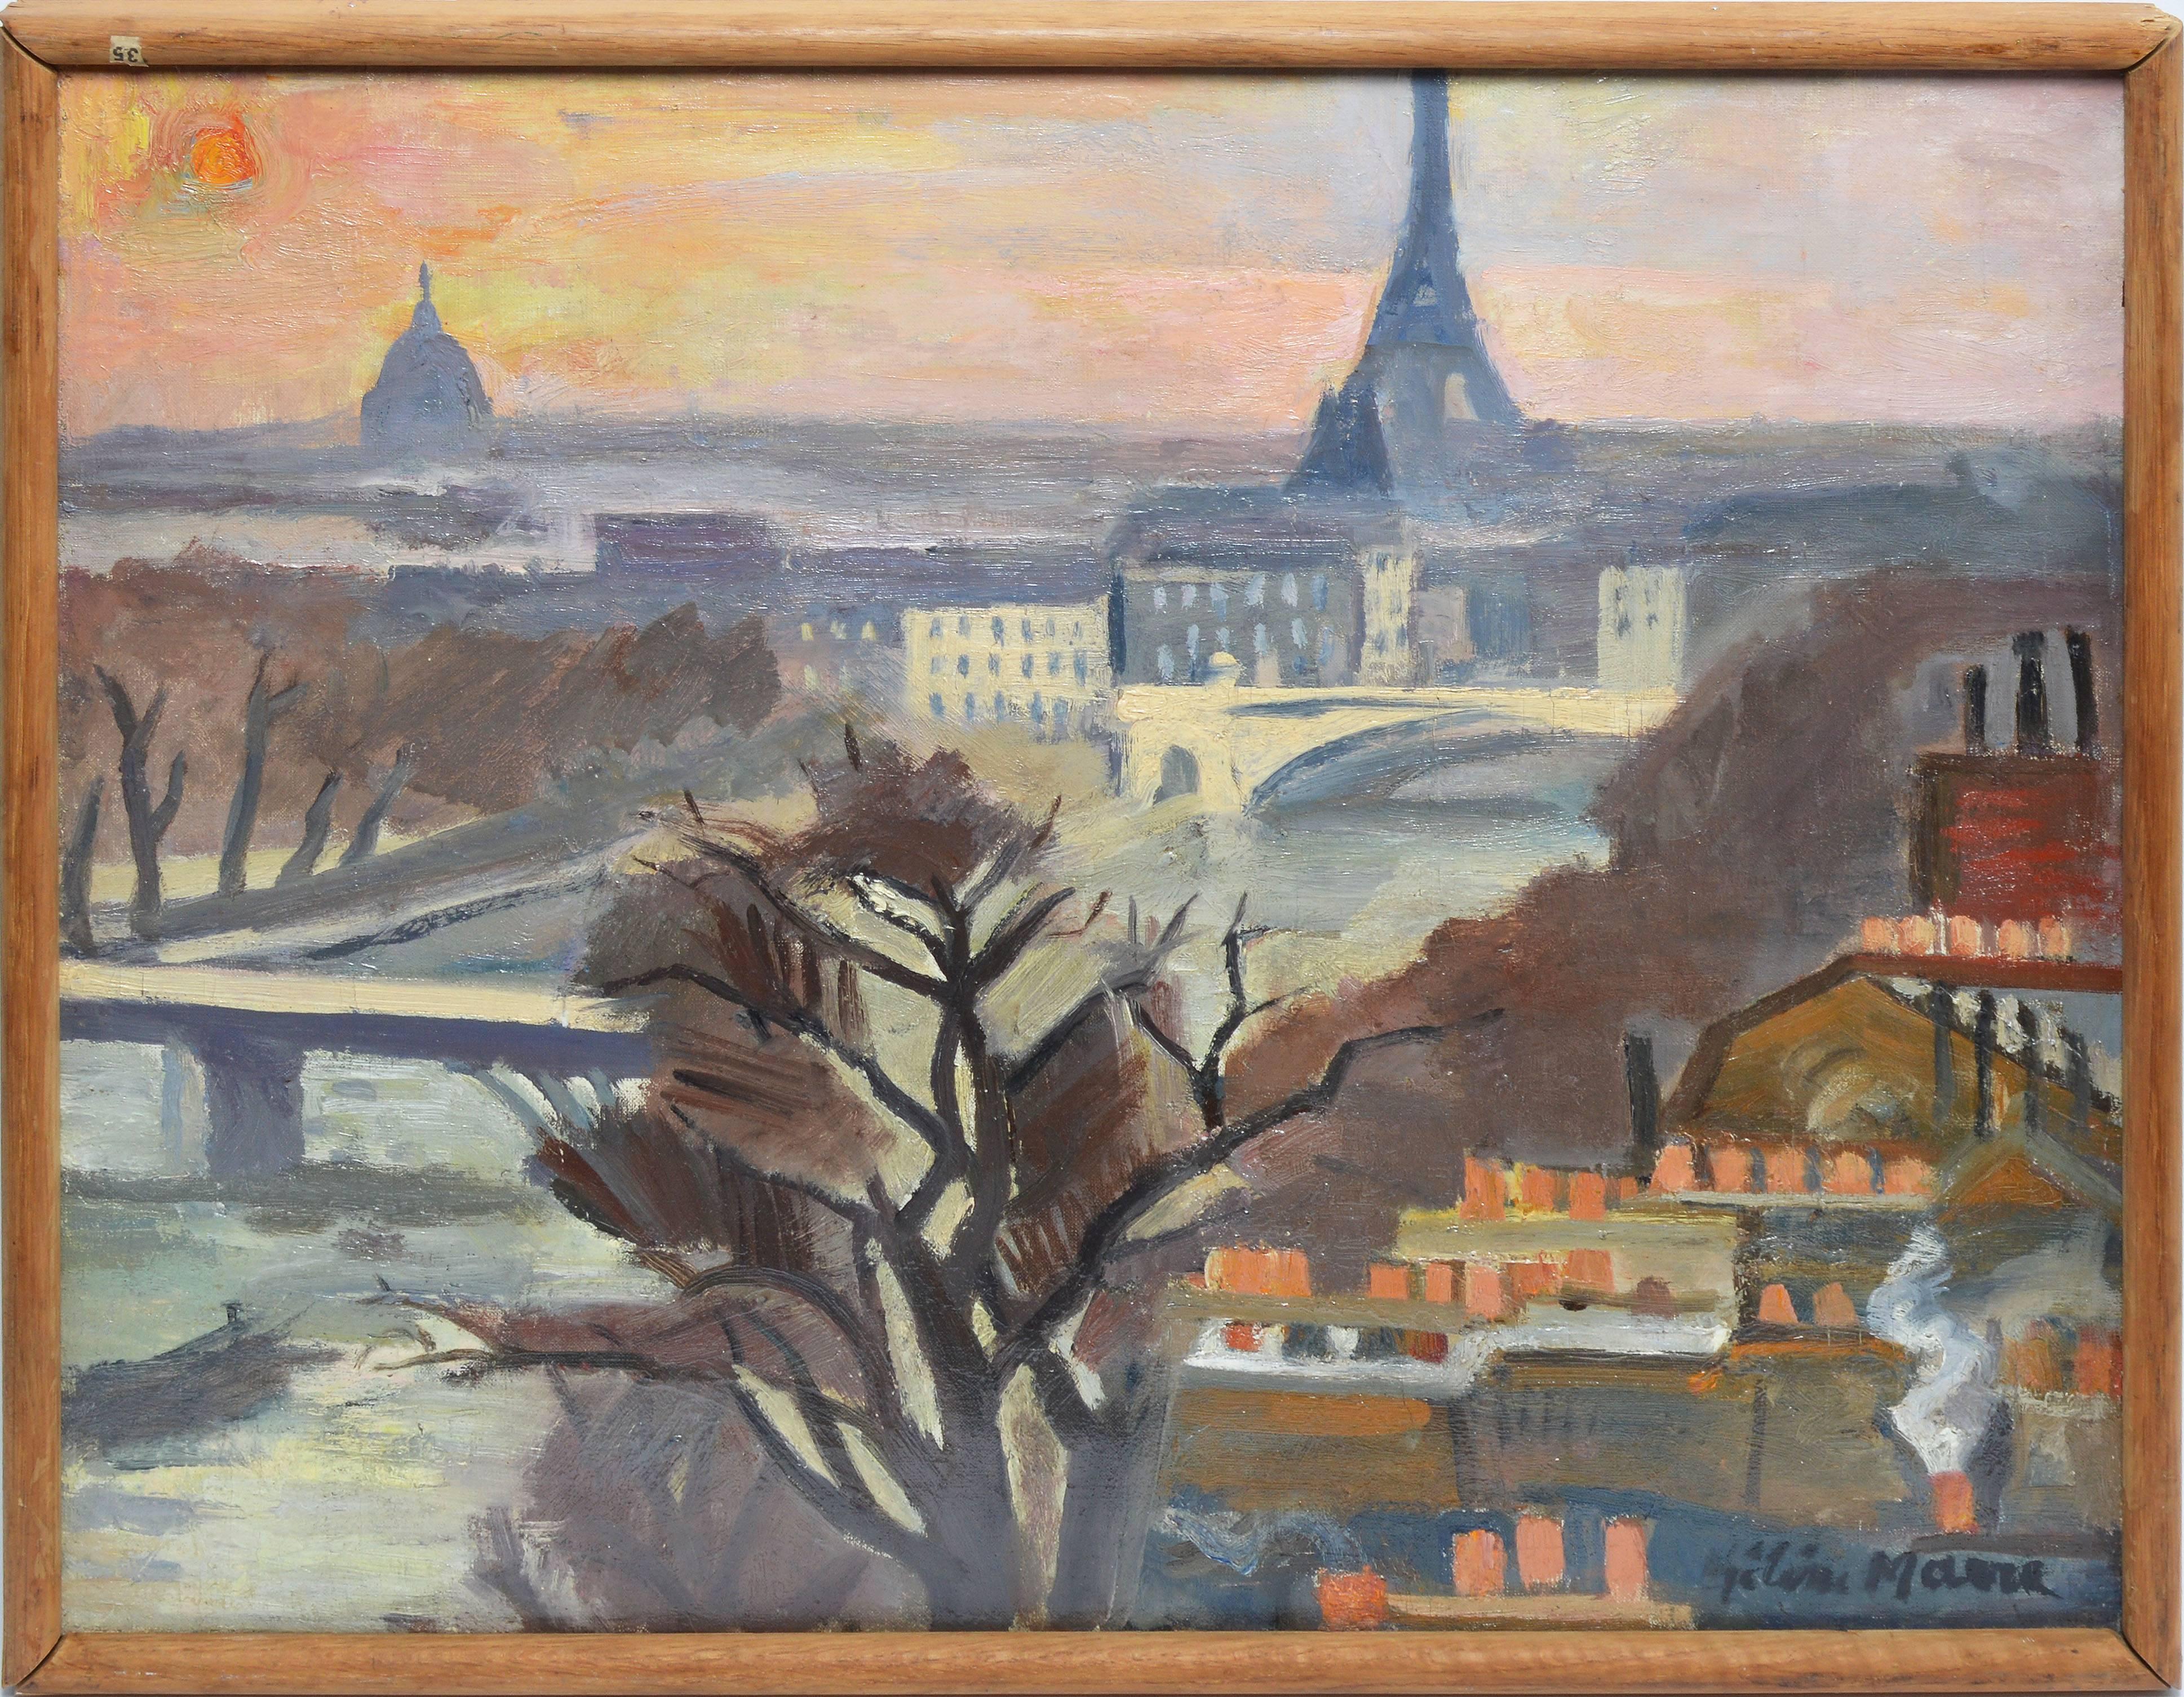 Impressionist cityscape of Paris with a sunset by Helen Marre (1891-1968).  Oil on canvas, circa 1930.  Signed lower right, "Helen Marre".  Displayed in a natural wood frame.  Image size, 21"L x 18"H, overall 22"L x 19"H.